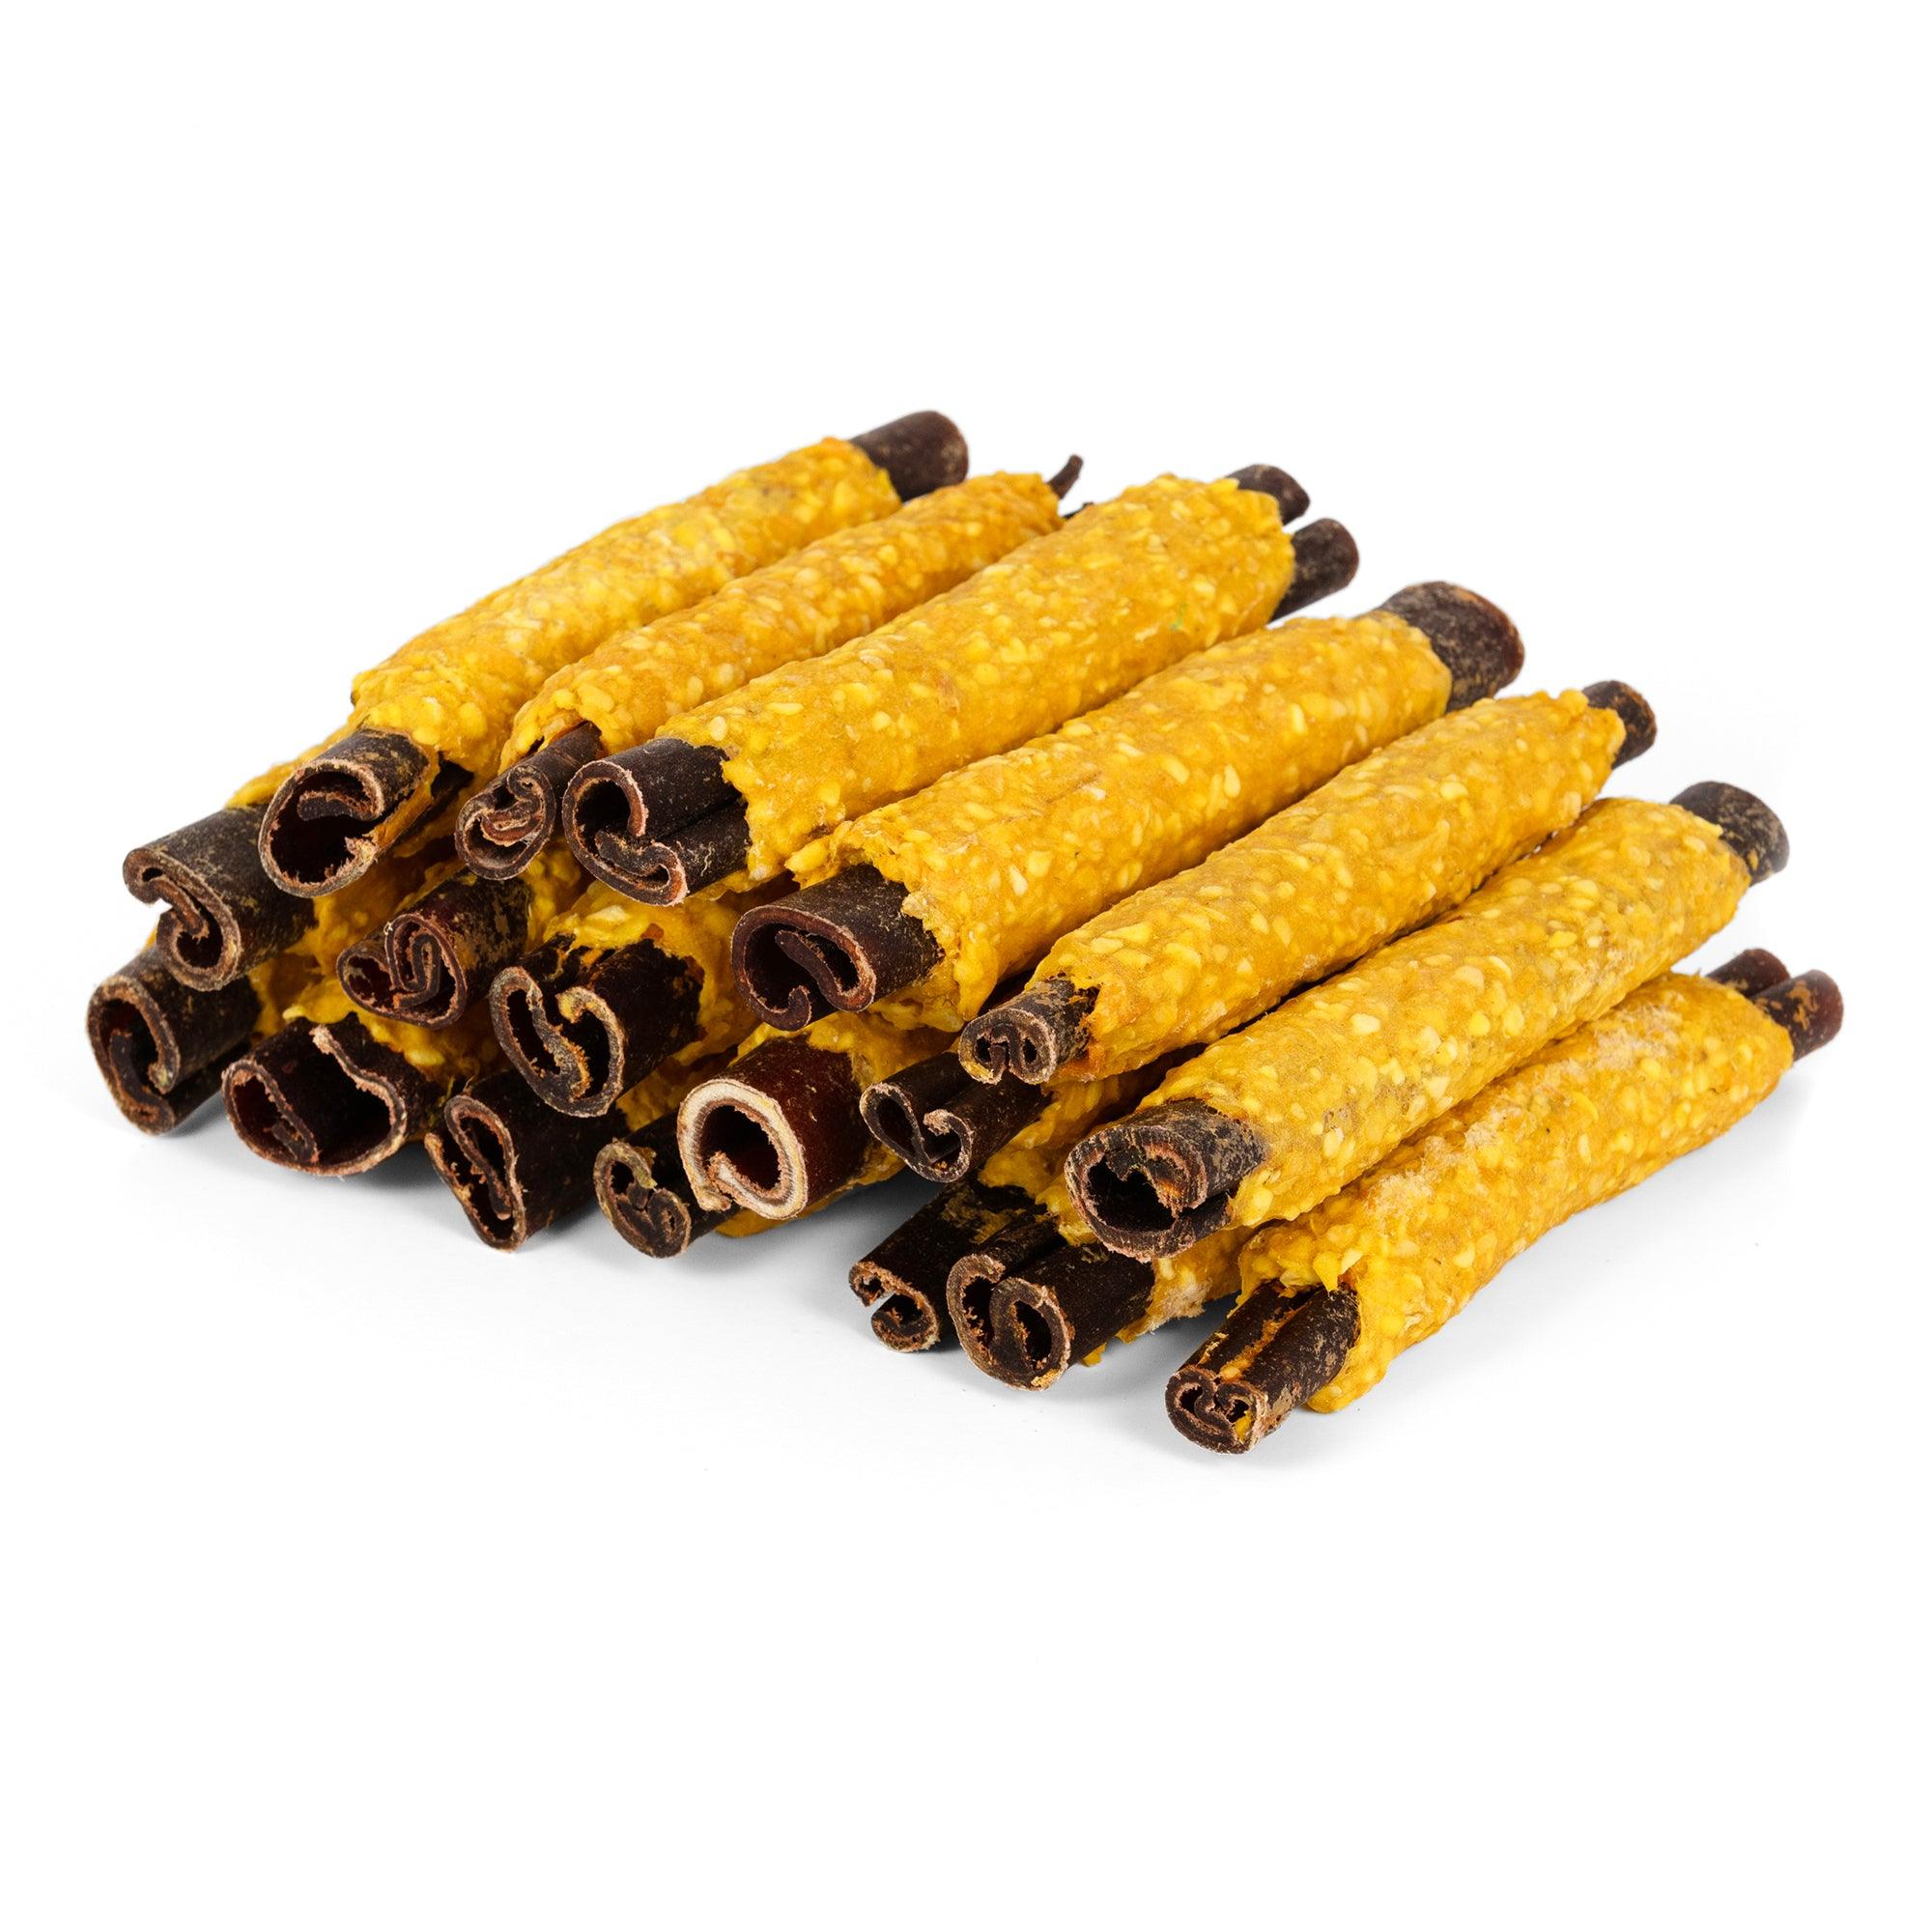 Cheesy Beef Collagen Sticks For Dogs - Brutus & Barnaby